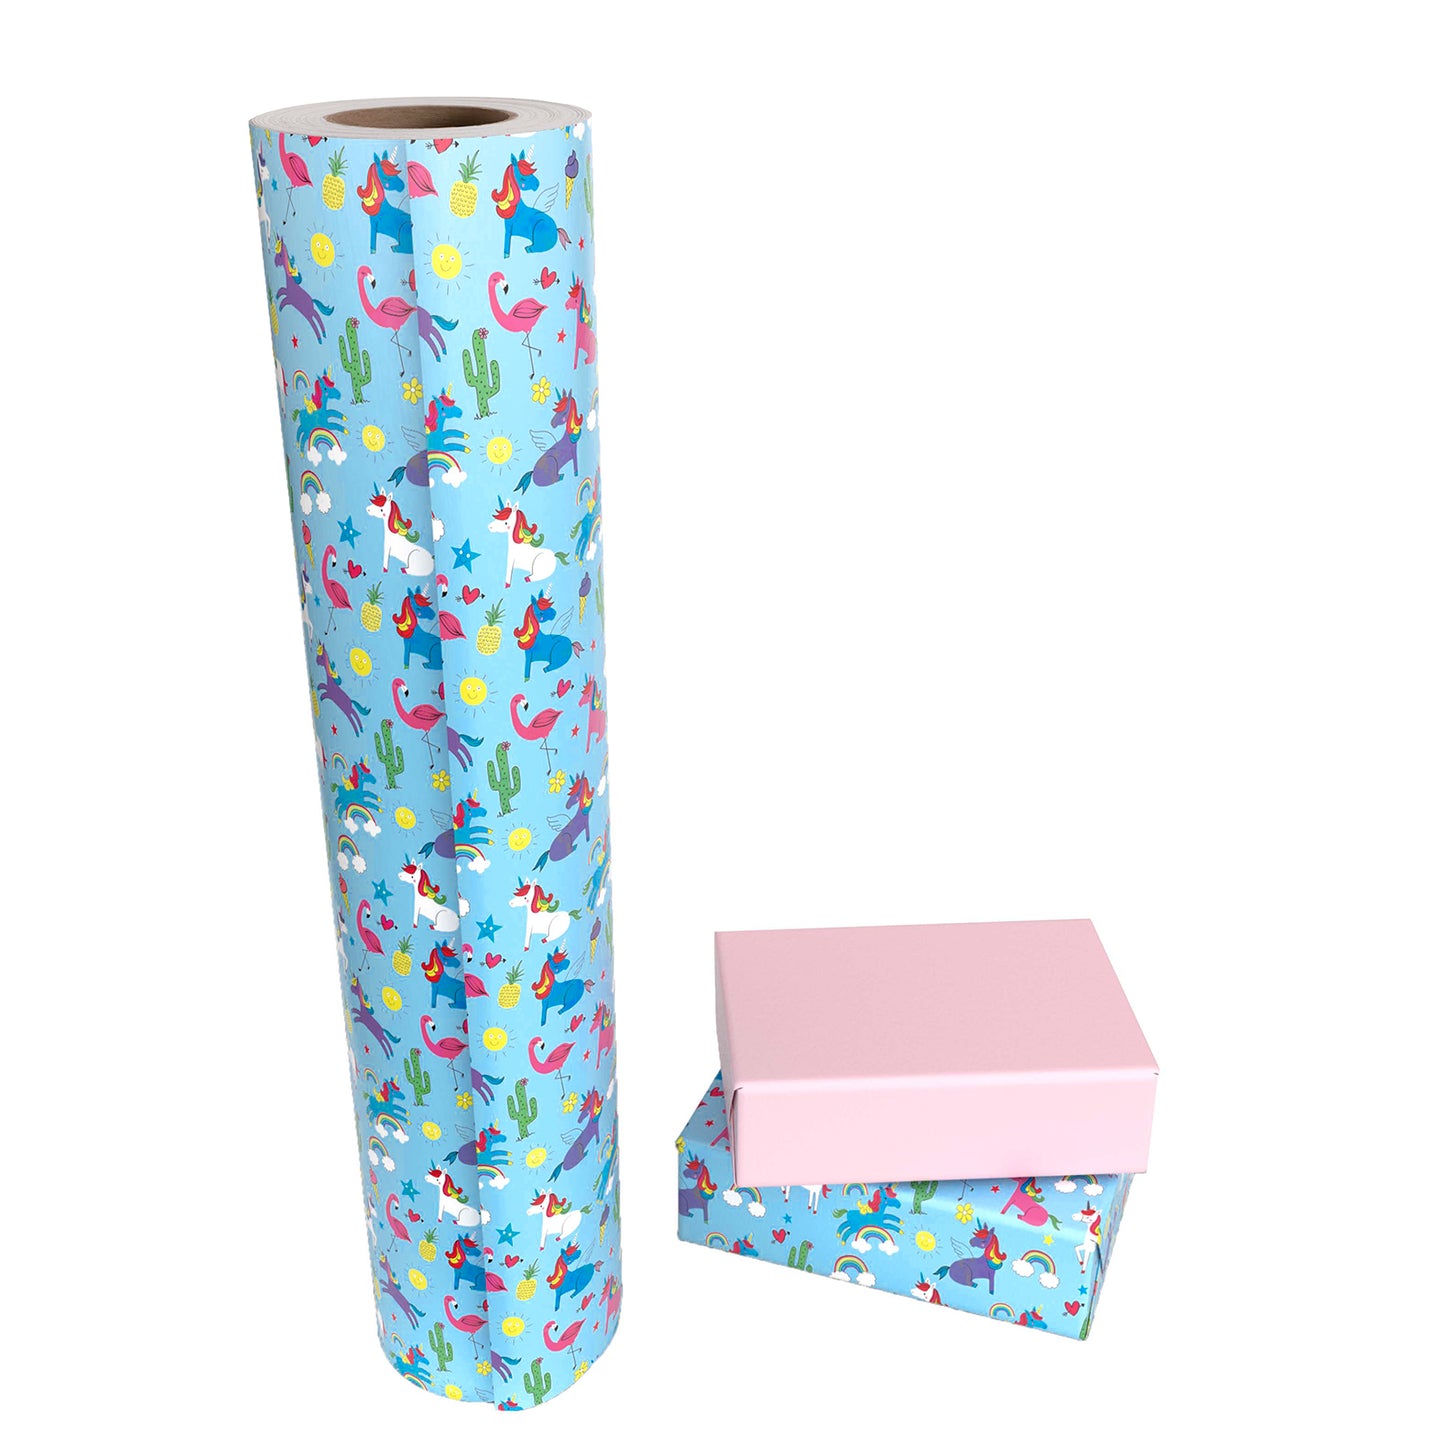 Rainbow Unicorn Flamingo Wrapping Paper with Pink Color Jumbo Roll Wholesale Wrapaholic